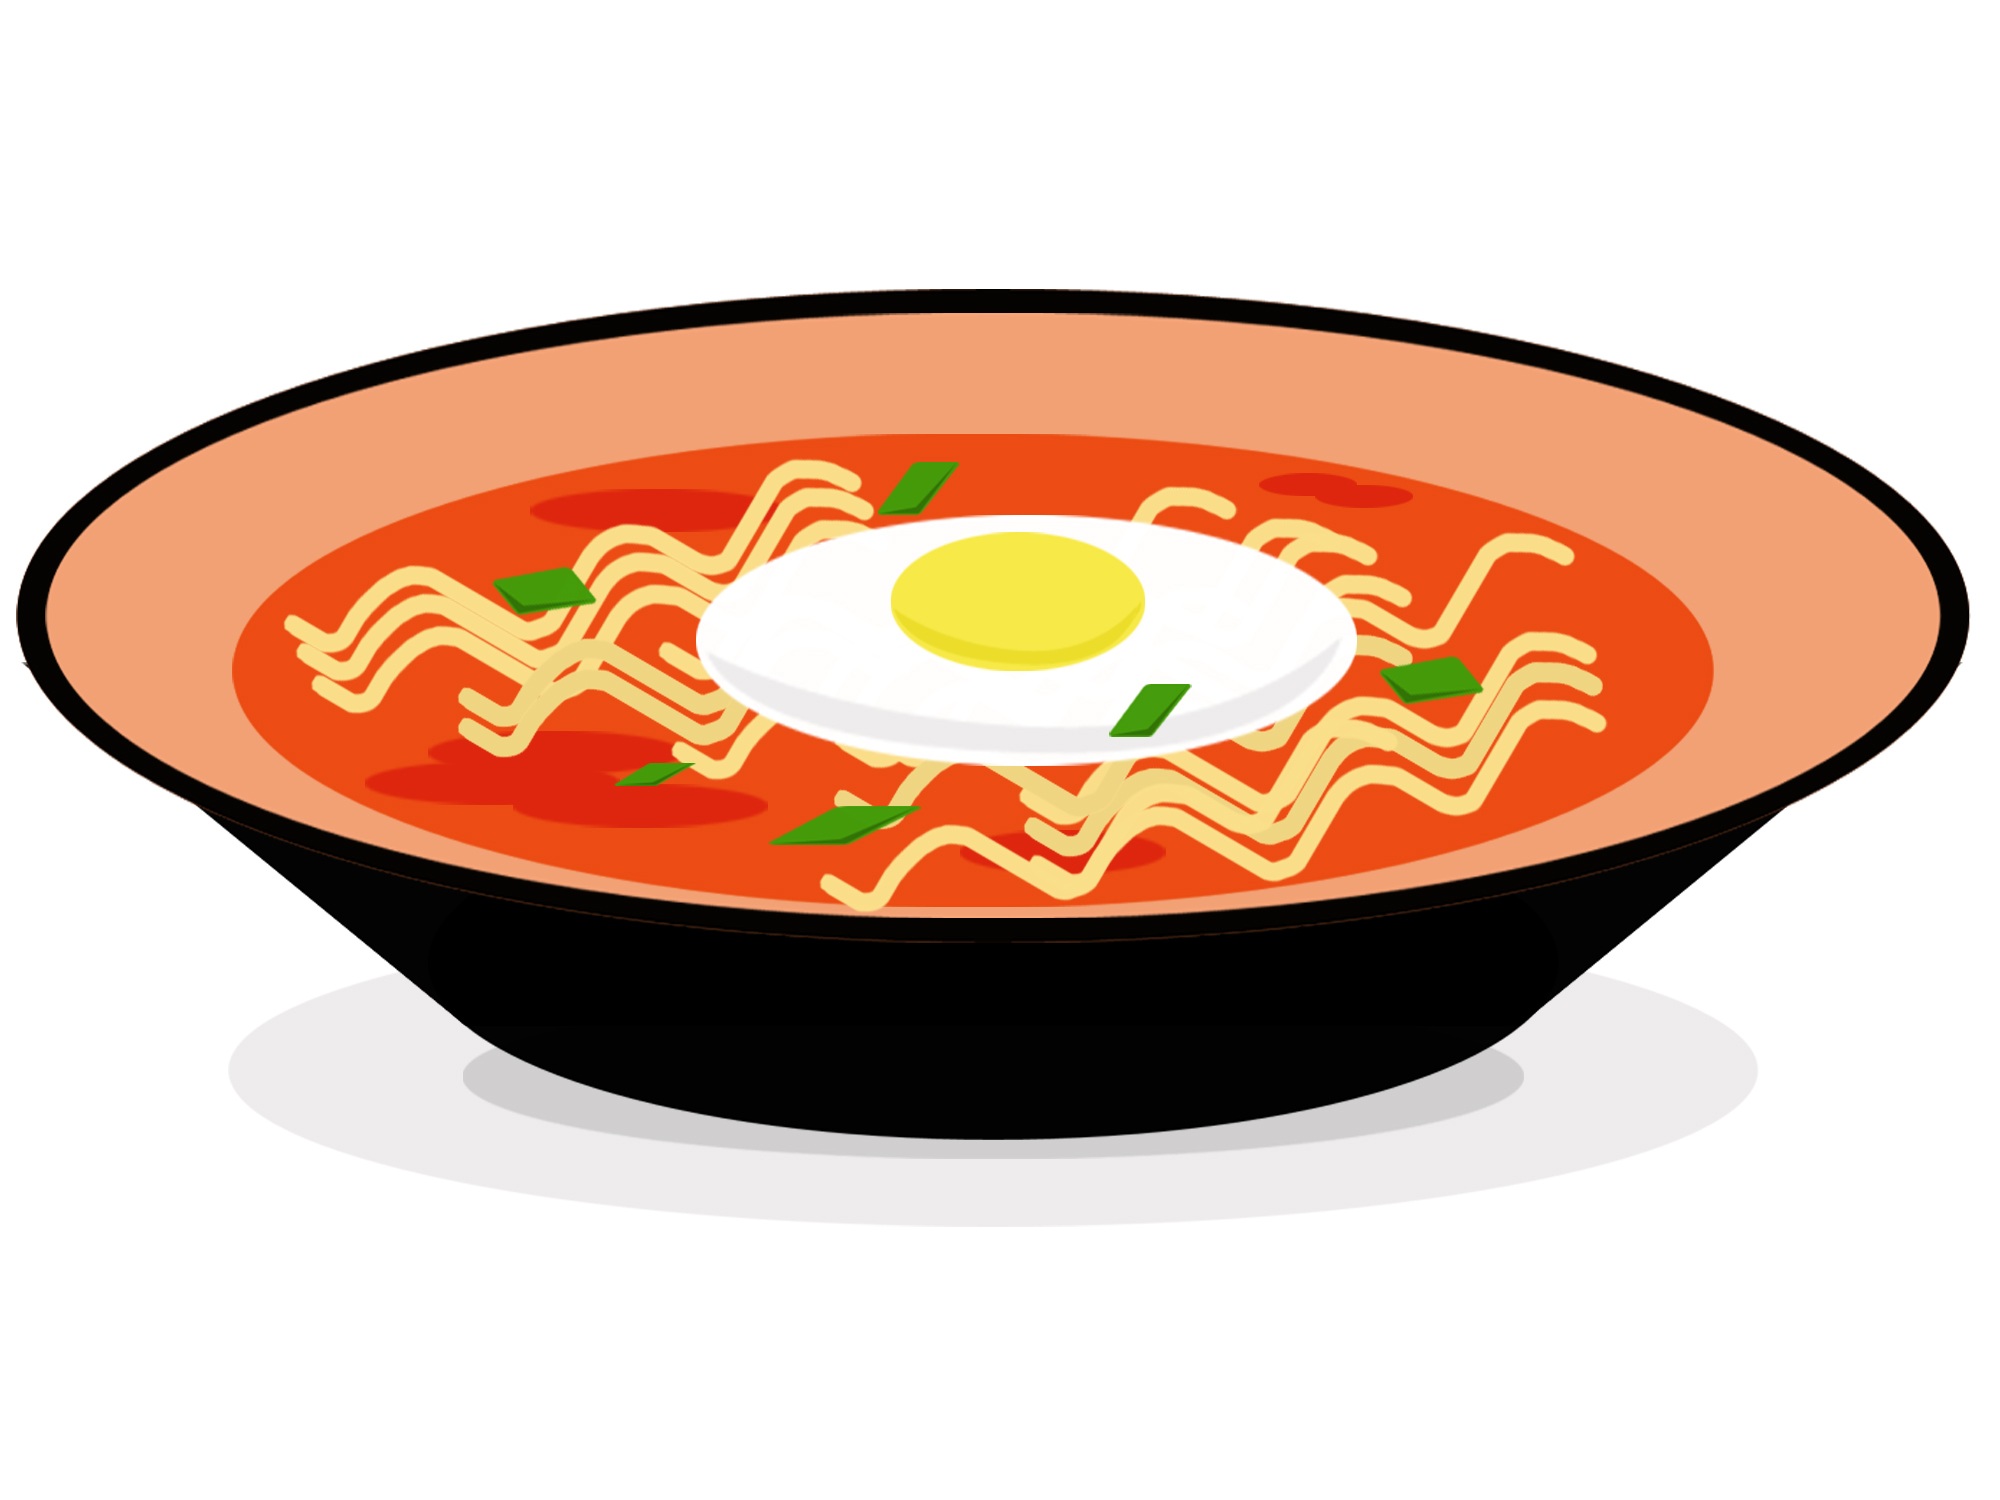 The Spicy Meat and Noodle drawing free image.